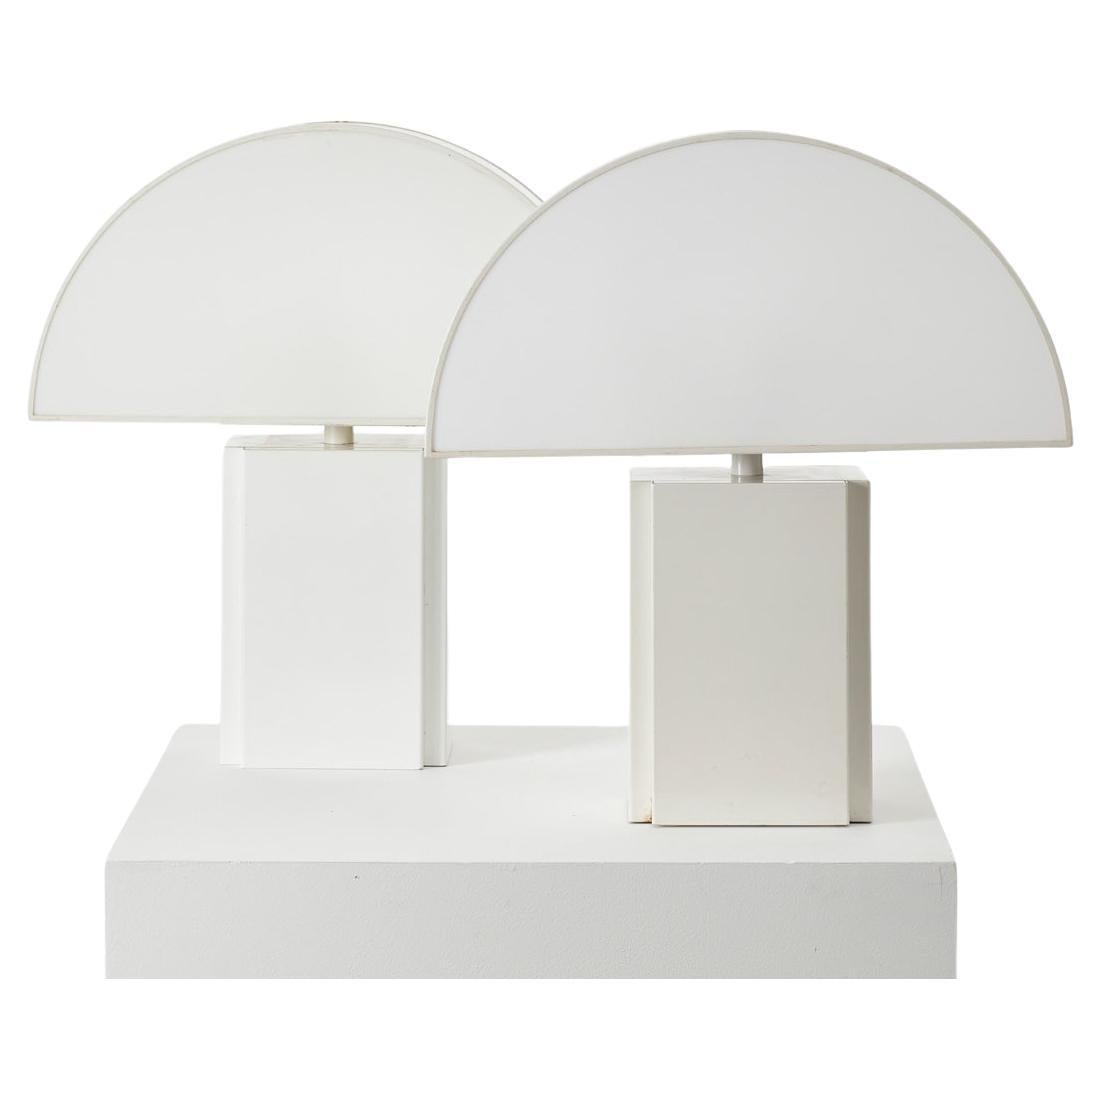 Pair of Harvey Guzzini Olympe Table Lamps for ED, Italy 1970s For Sale